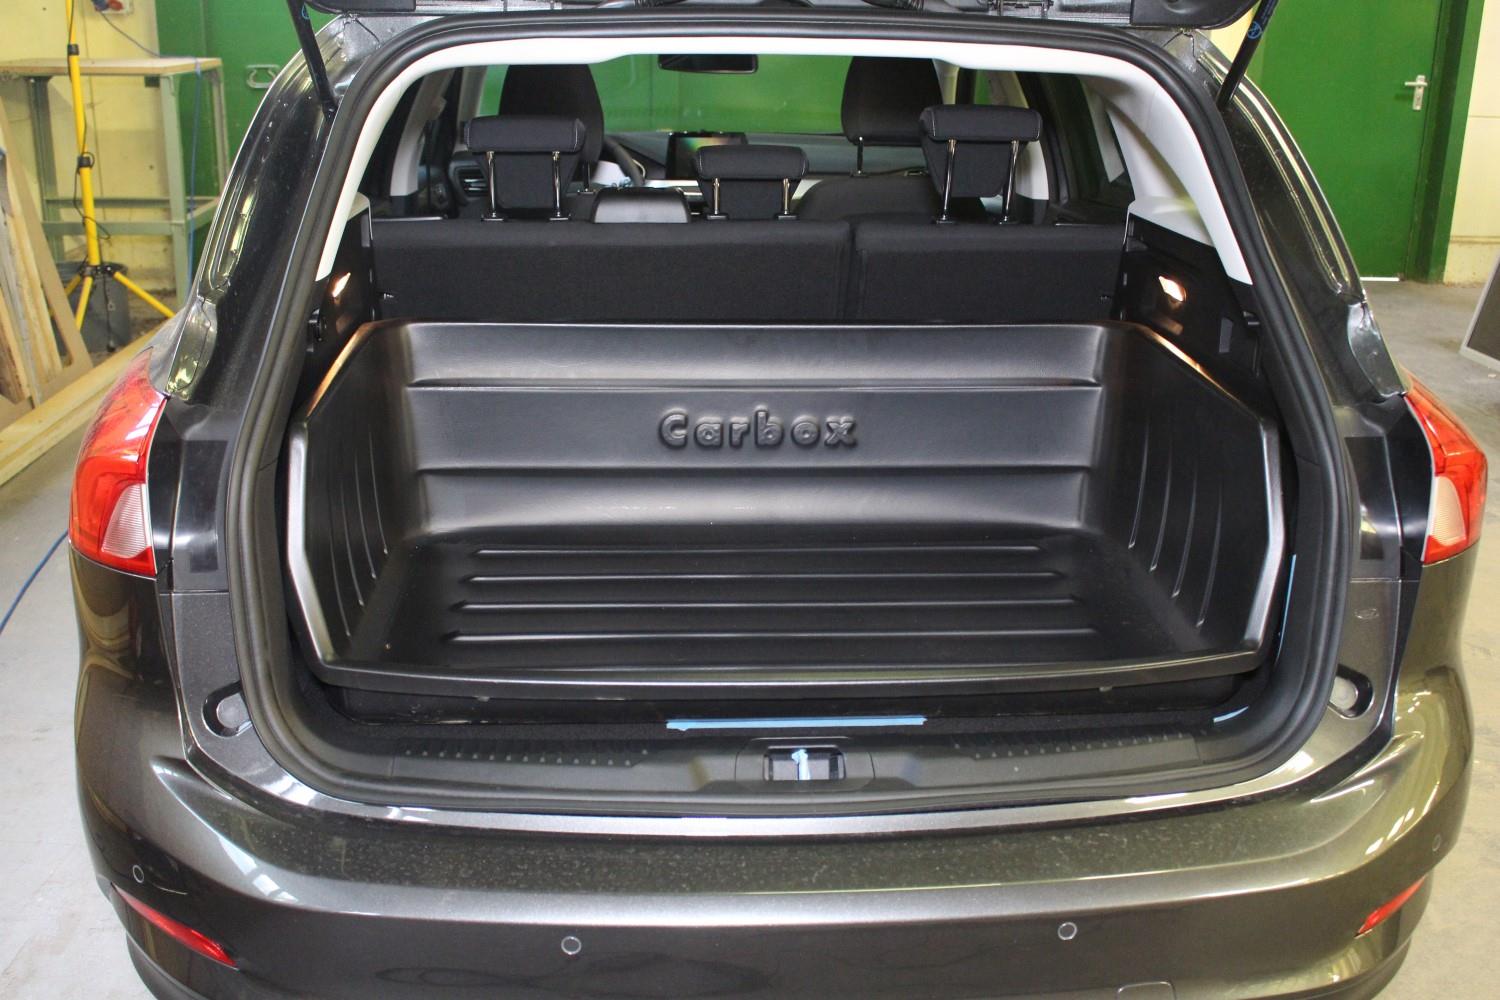 https://www.petwareshop.com/images/stories/virtuemart/product/for5focc-ford-focus-iv-2018-wagon-carbox-classic-yoursize-high-sided-boot-liner-1.jpg